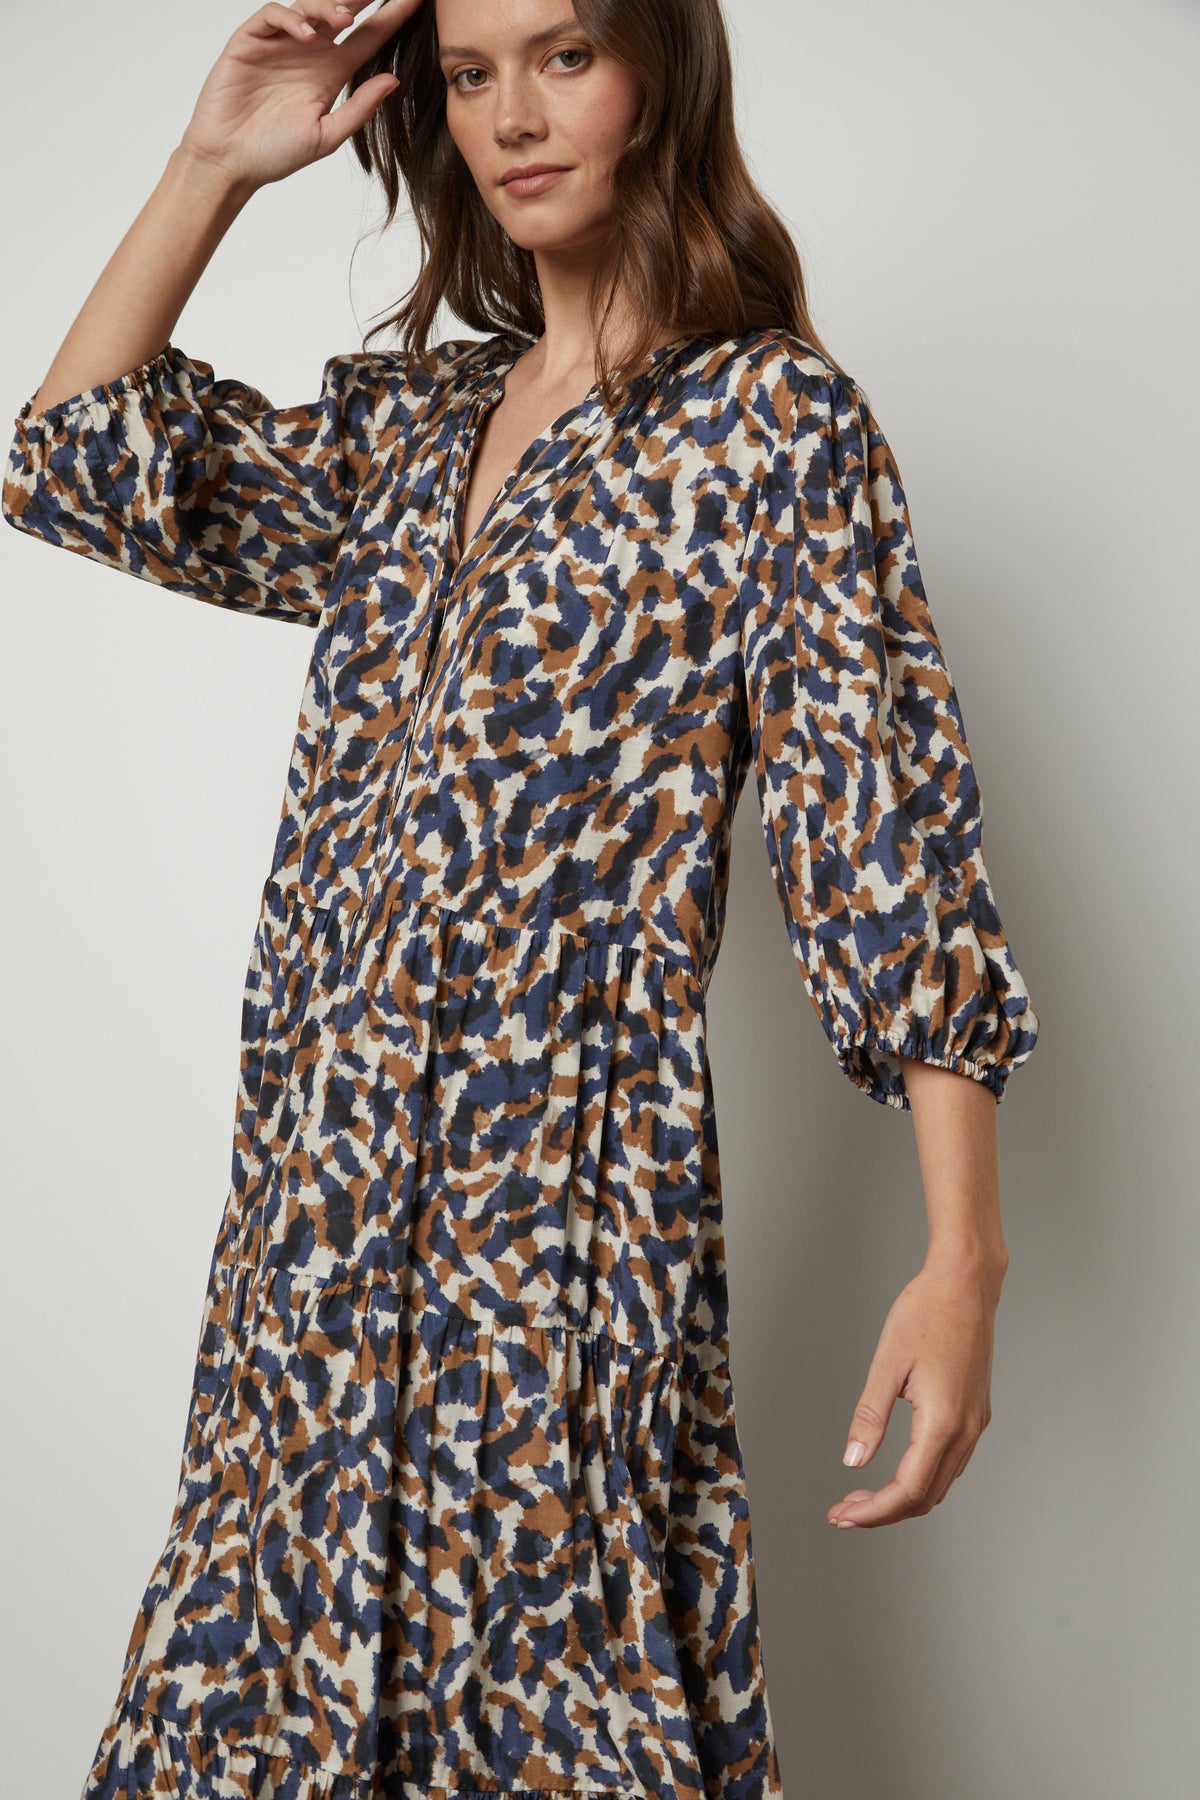   The model is wearing a blue and brown button front Velvet by Graham & Spencer OTTILIE PRINTED BOHO DRESS. 